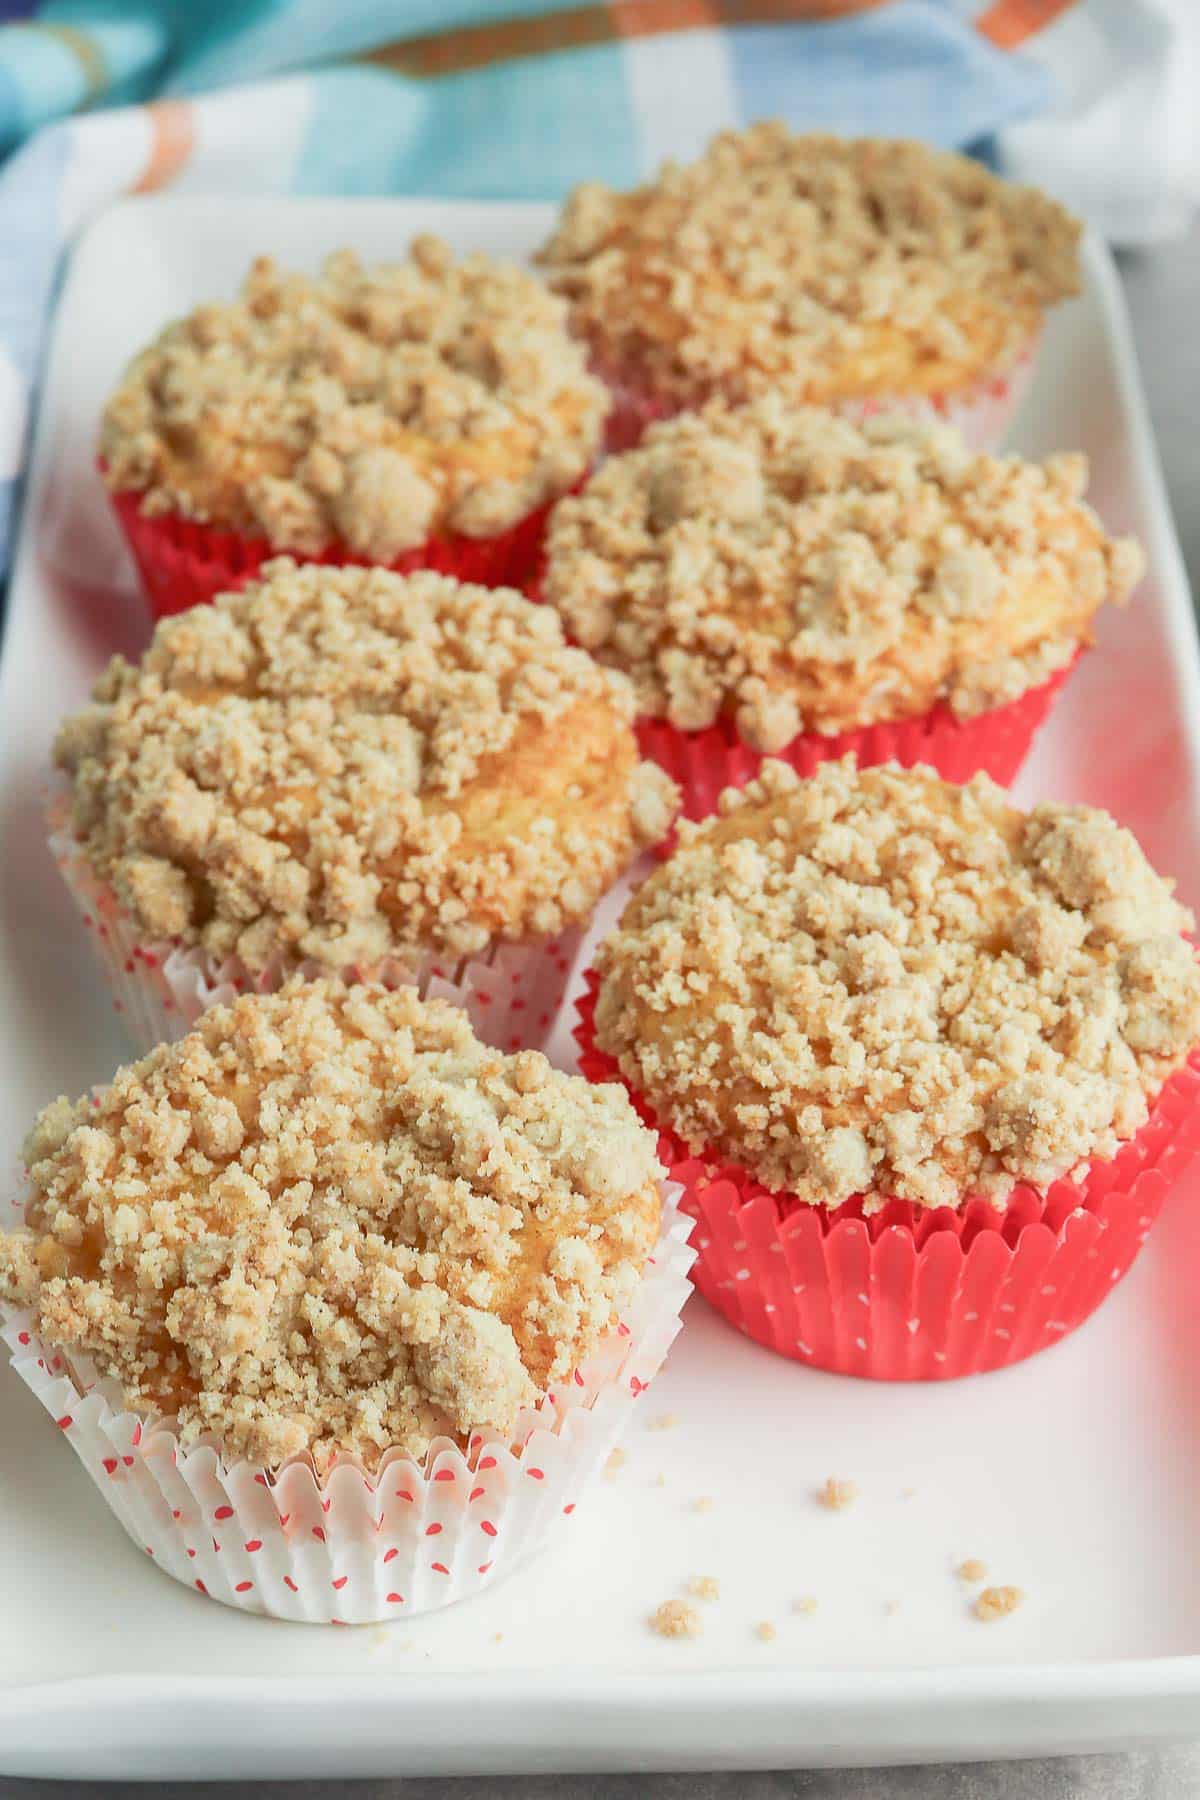 Apple cinnamon muffins on a white plate.